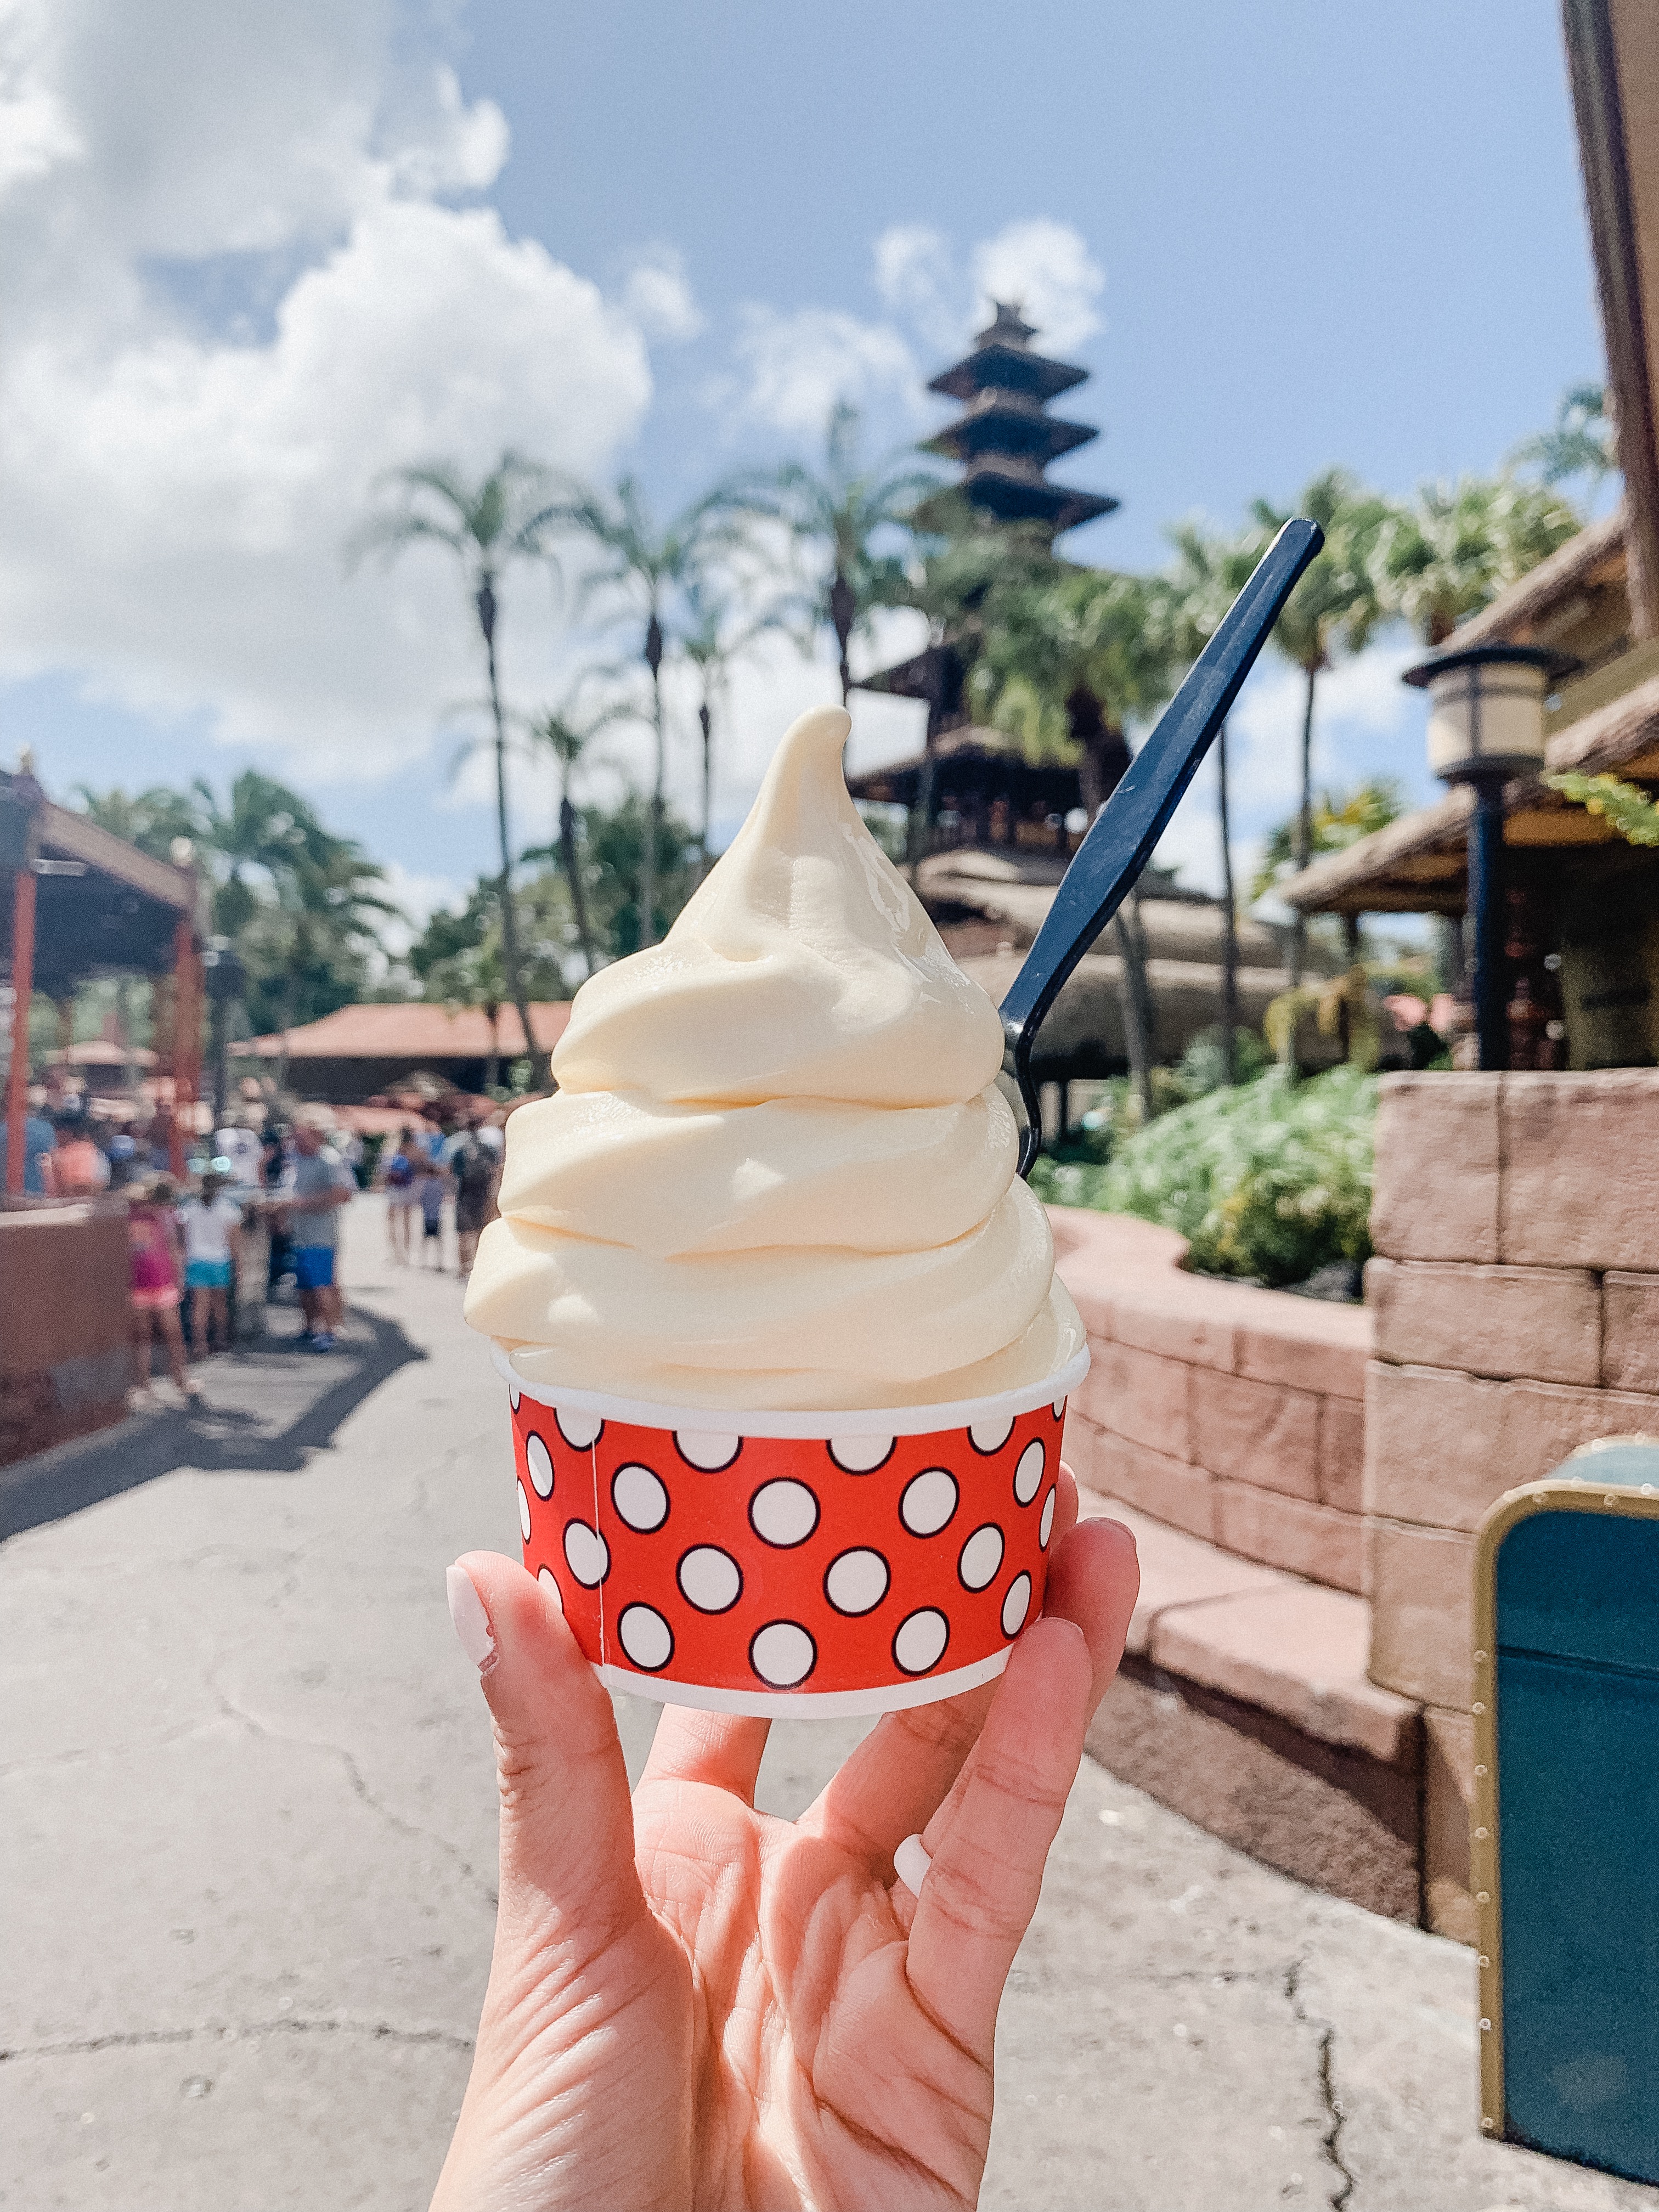 Connecticut life and style blogger Lauren McBride shares about her family's first trip to Walt Disney World, including details on all 4 Disney parks, age specific rides, tips and tricks, and more.